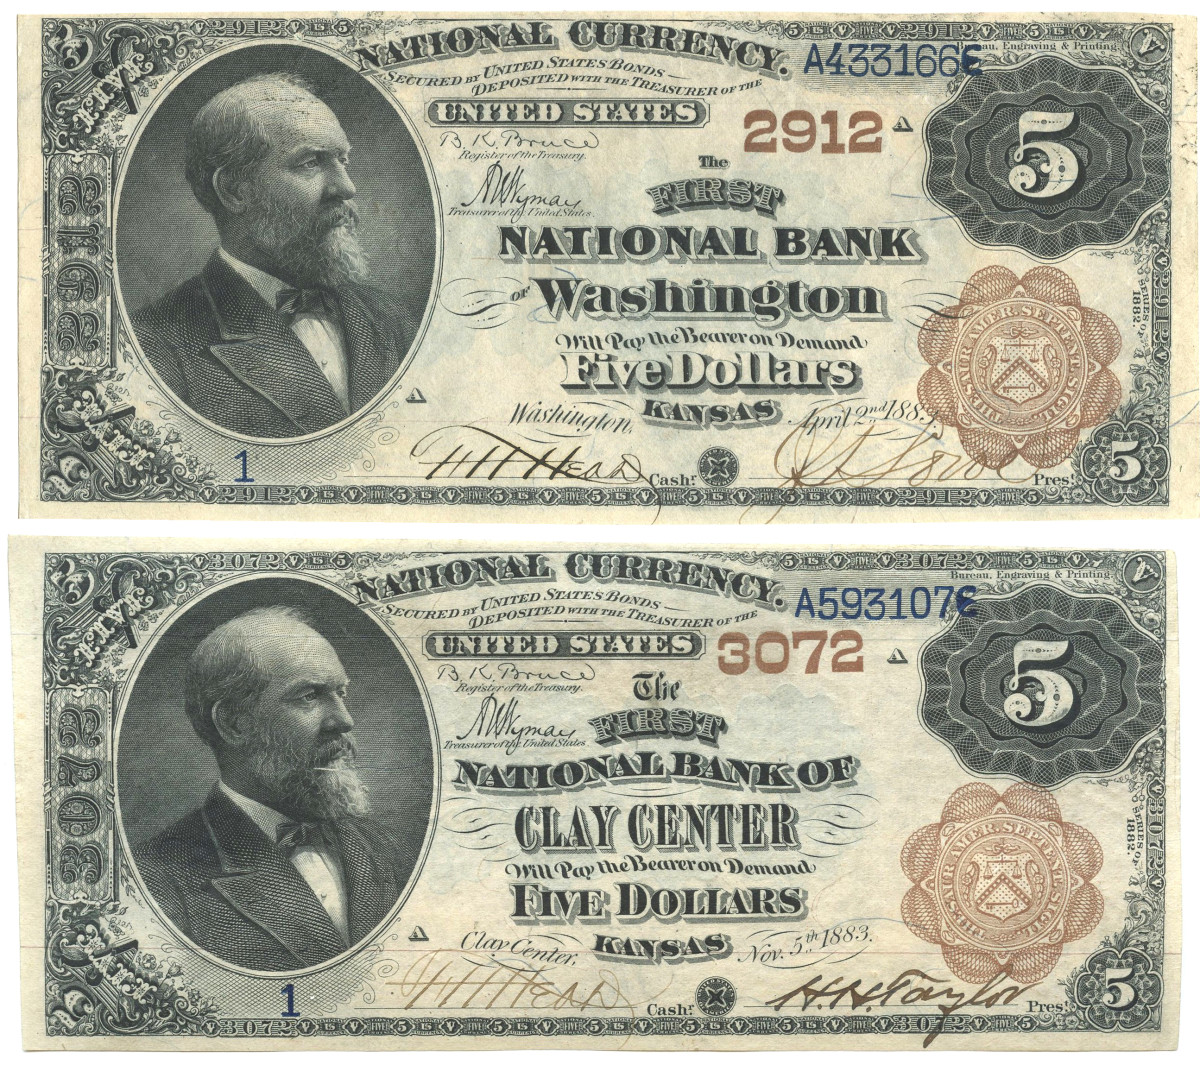 Newly discovered serial No. 1 $5 Brown Backs from The First National Banks of Washington and Clay Center, Kan. F.H. Head signed both as cashier. The lettering in the title blocks for both of these notes was made on patented lettering machines.